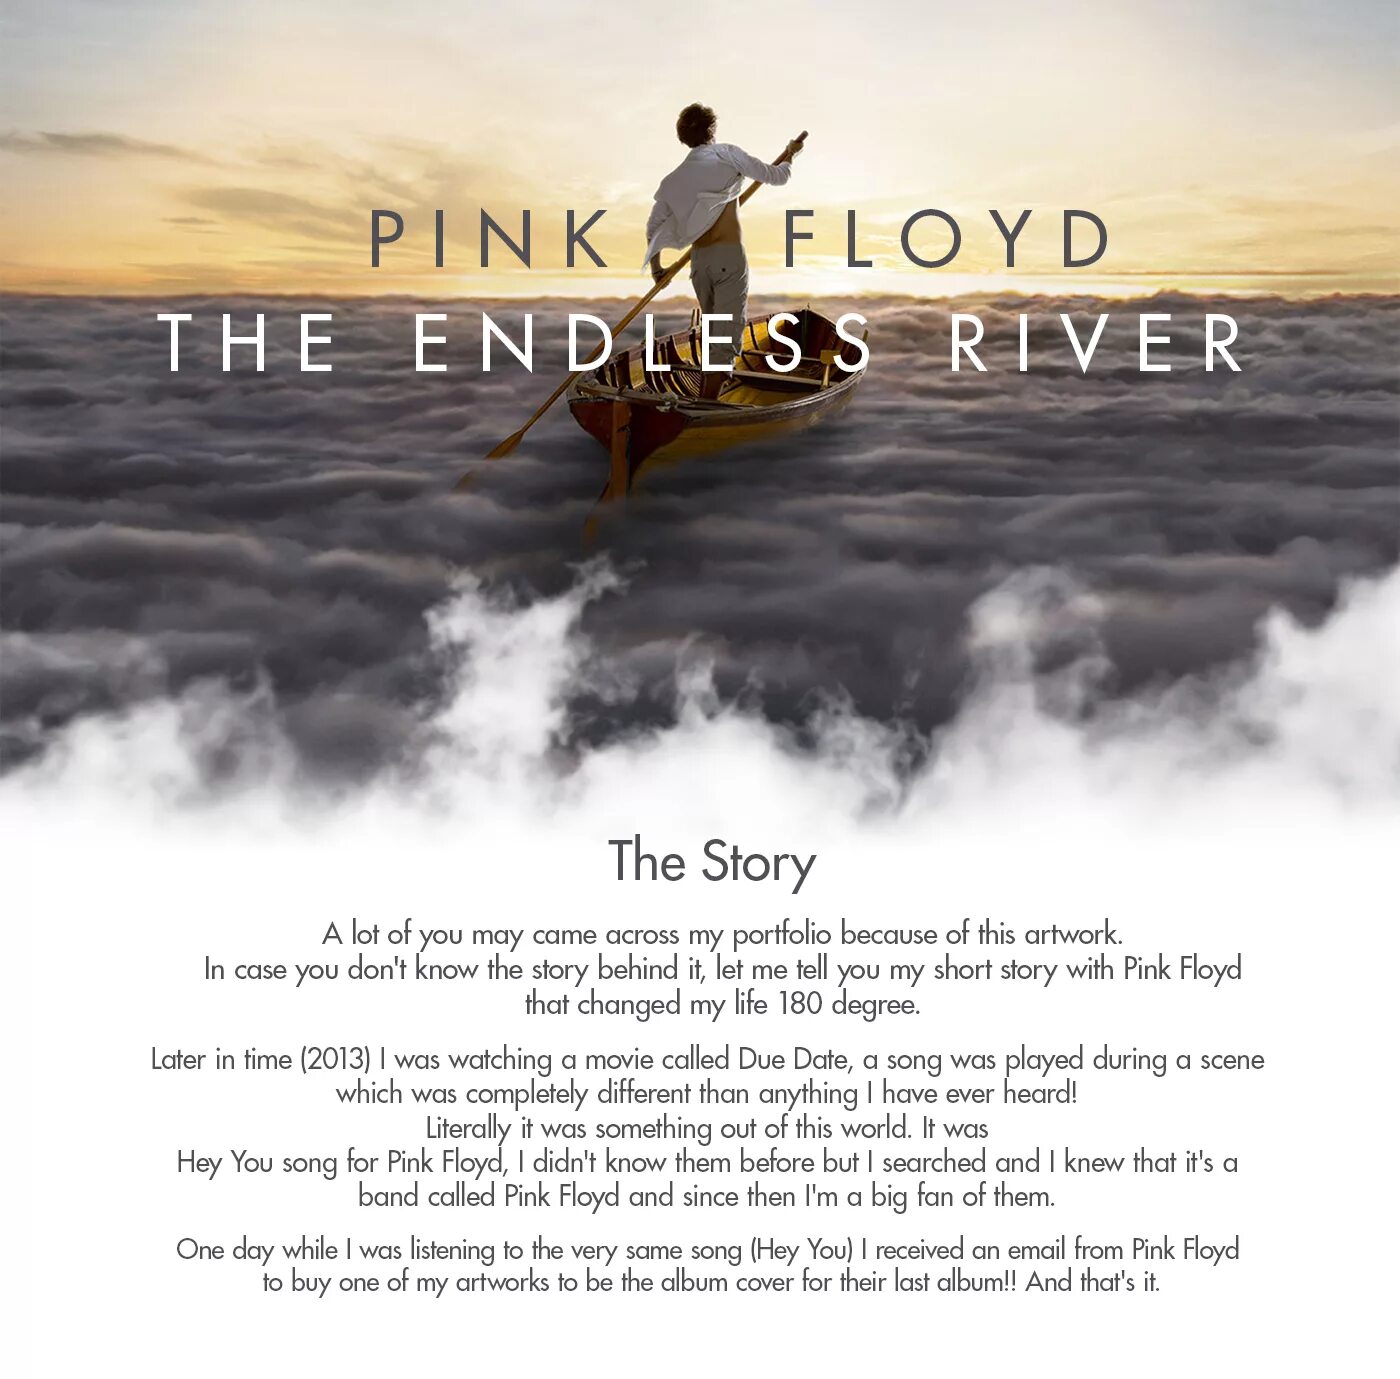 The endless river. Пинк Флойд the endless River. Пинк Флойд бесконечная река. Pink Floyd the endless River 2014. Pink Floyd the endless River 2014 обложка.